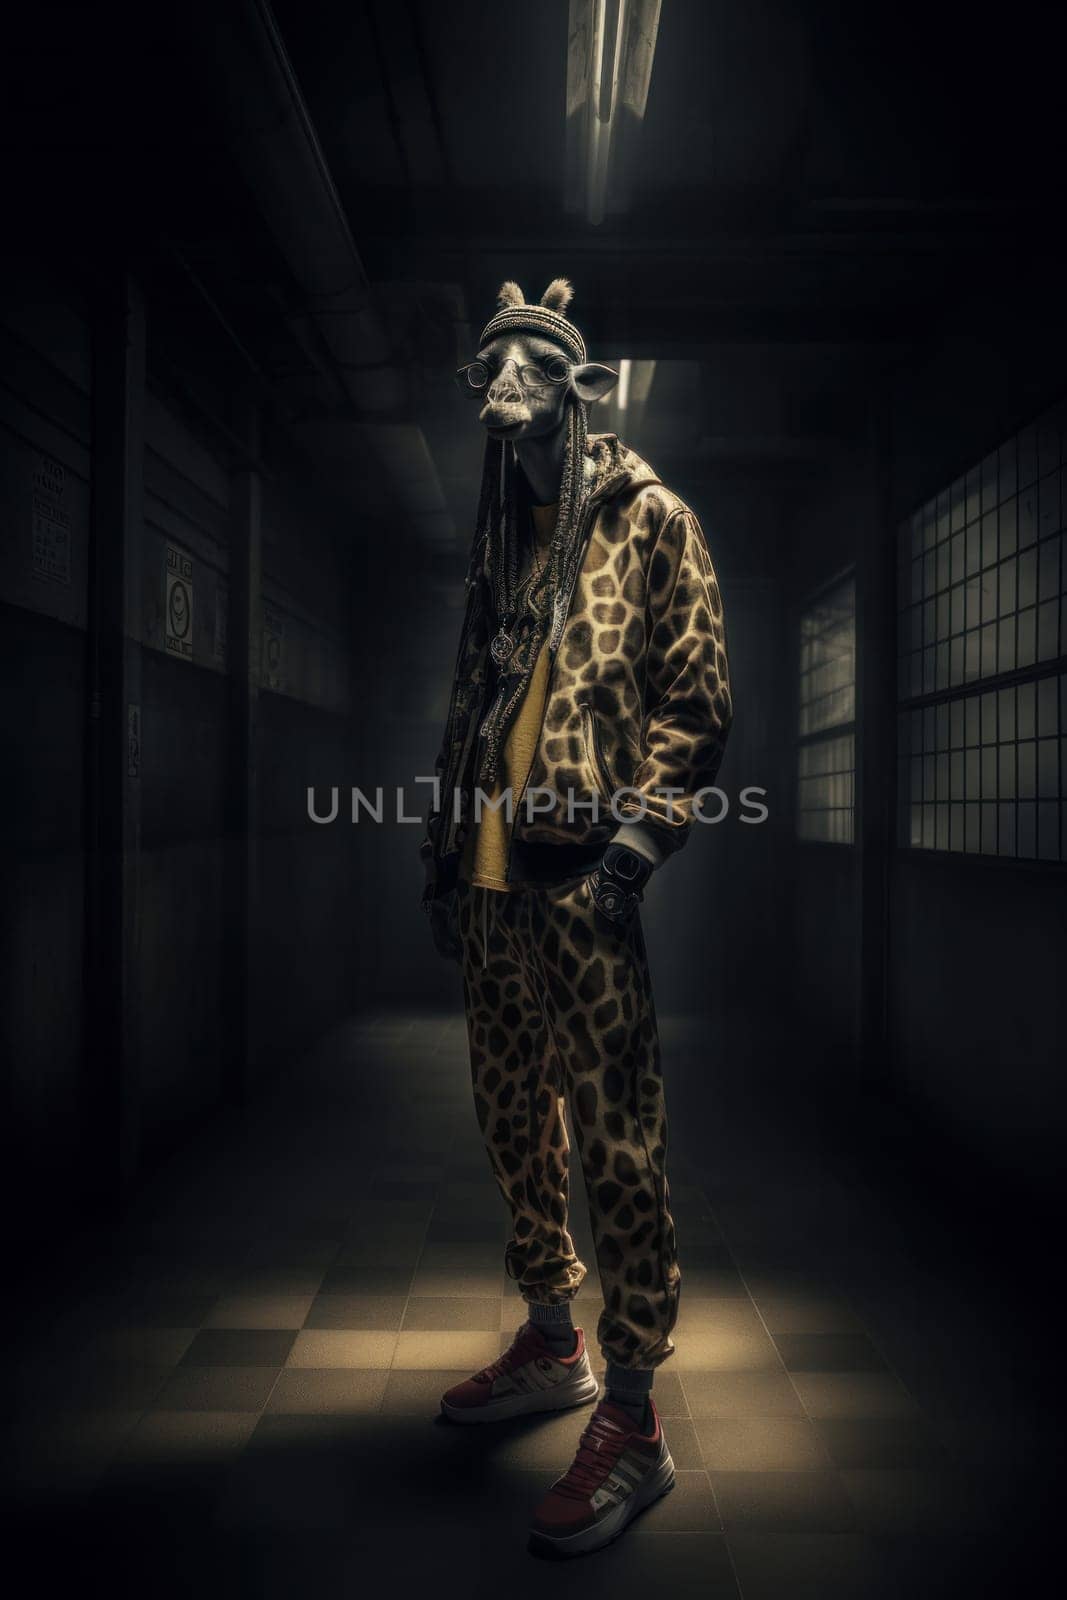 A giraffe dressed in a costume of jacket and pants by Sorapop